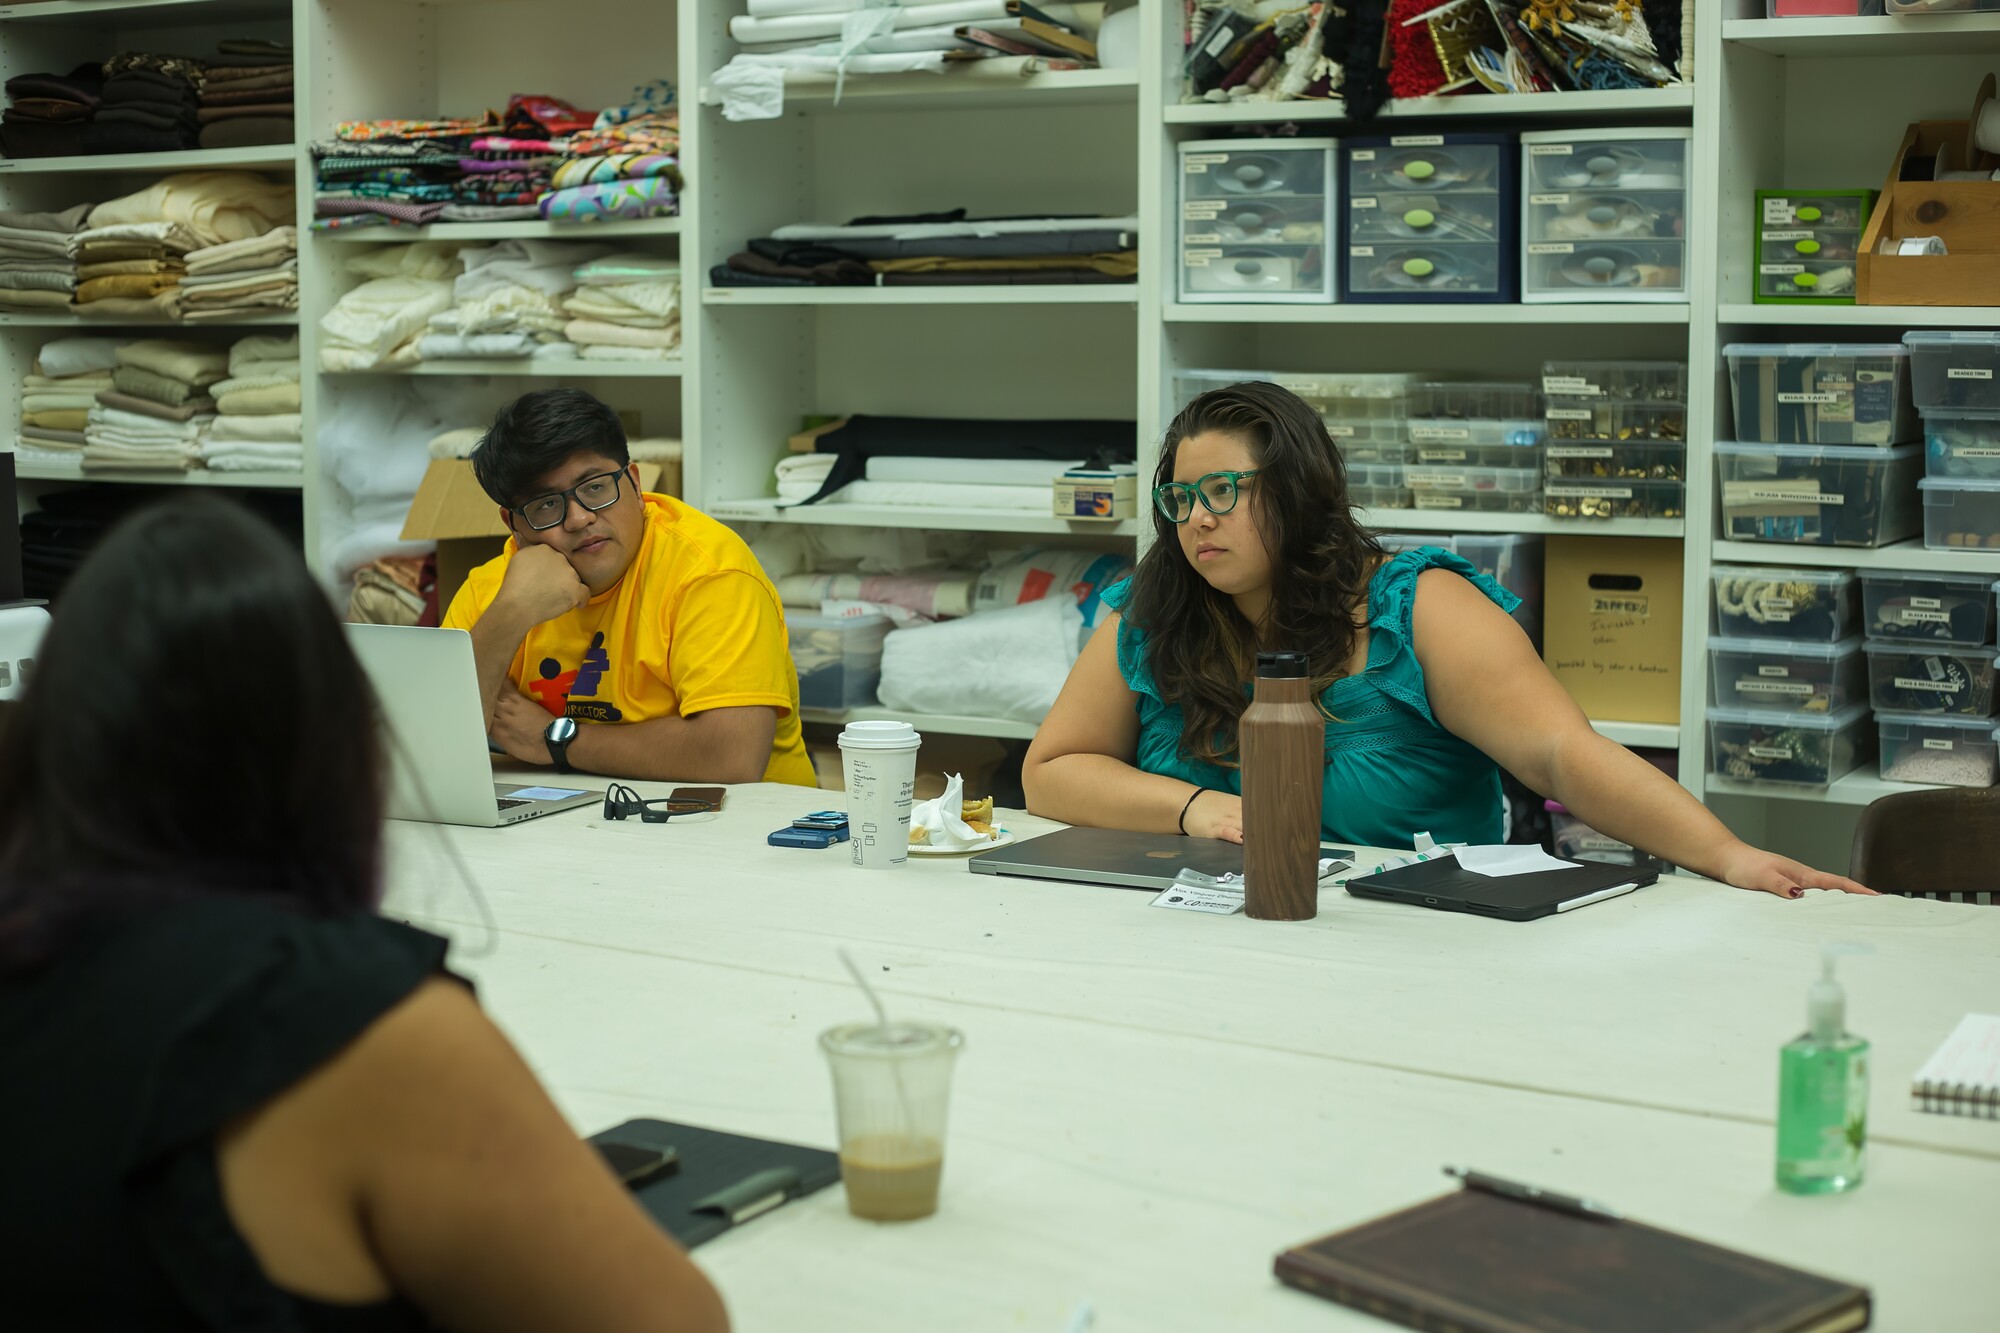 Two Colaboratorio participants listen intently during a session.